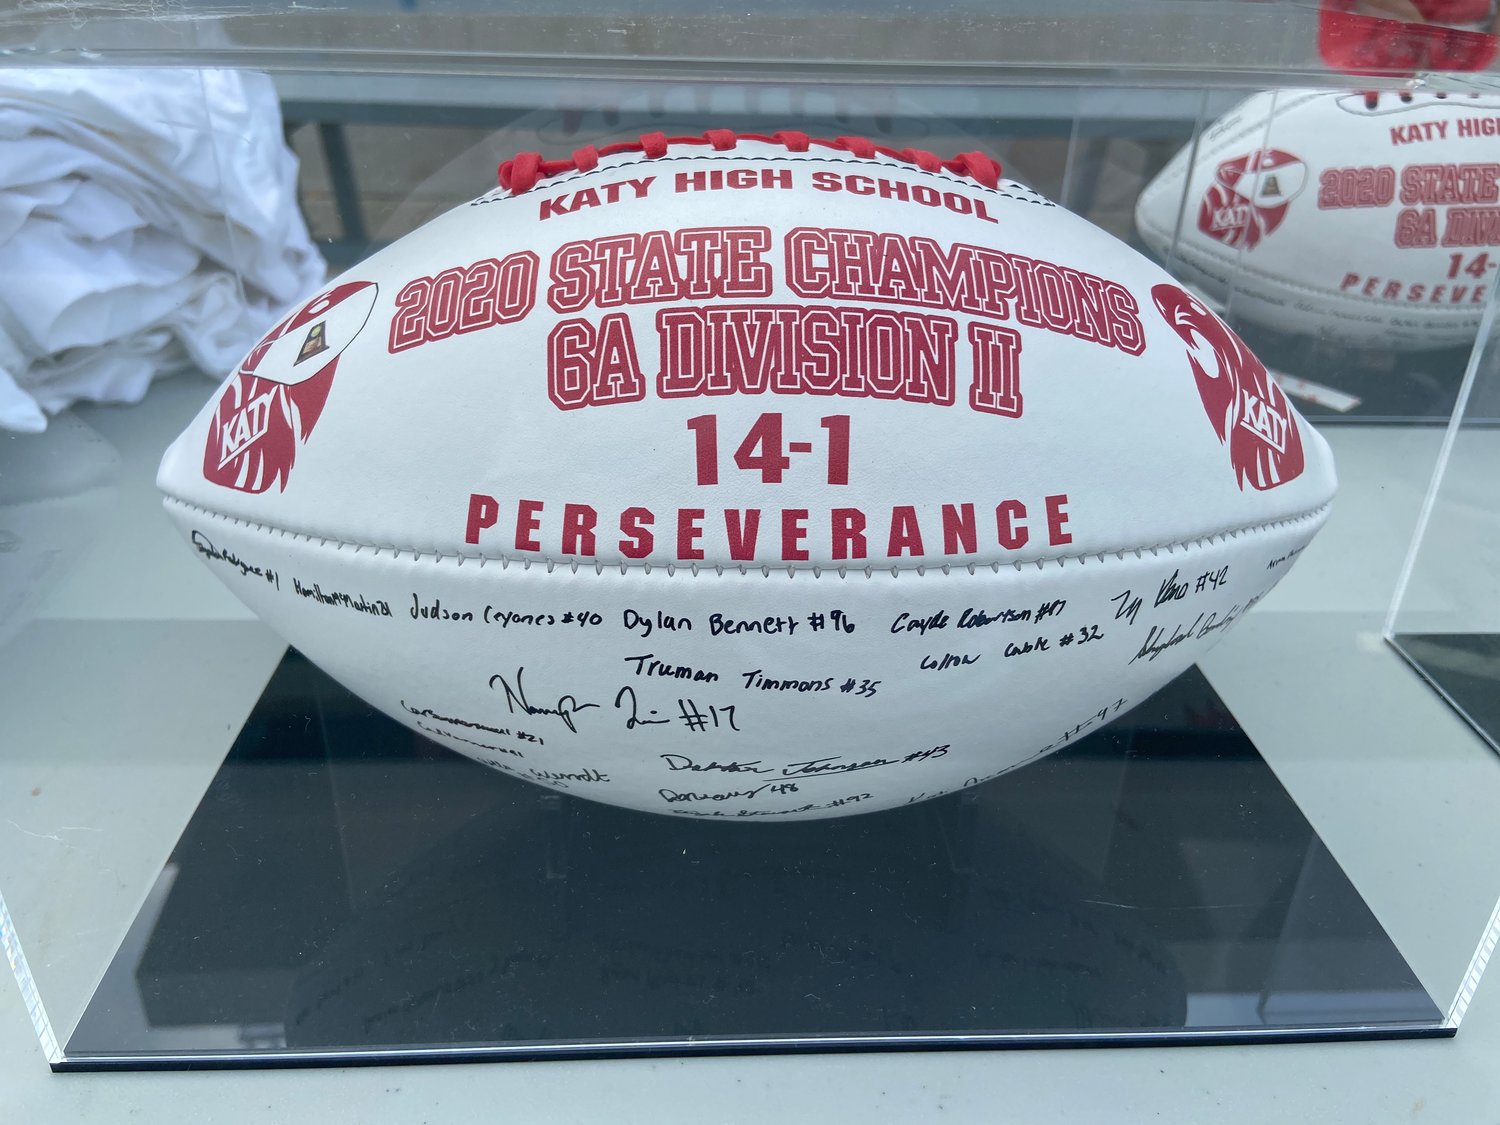 Pictured is one of the 2020 state championship footballs, signed by players, that were awarded to the moms of team captains Taylor Saulsberry, Ty Kana, Shepherd Bowling and Dalton Johnson.